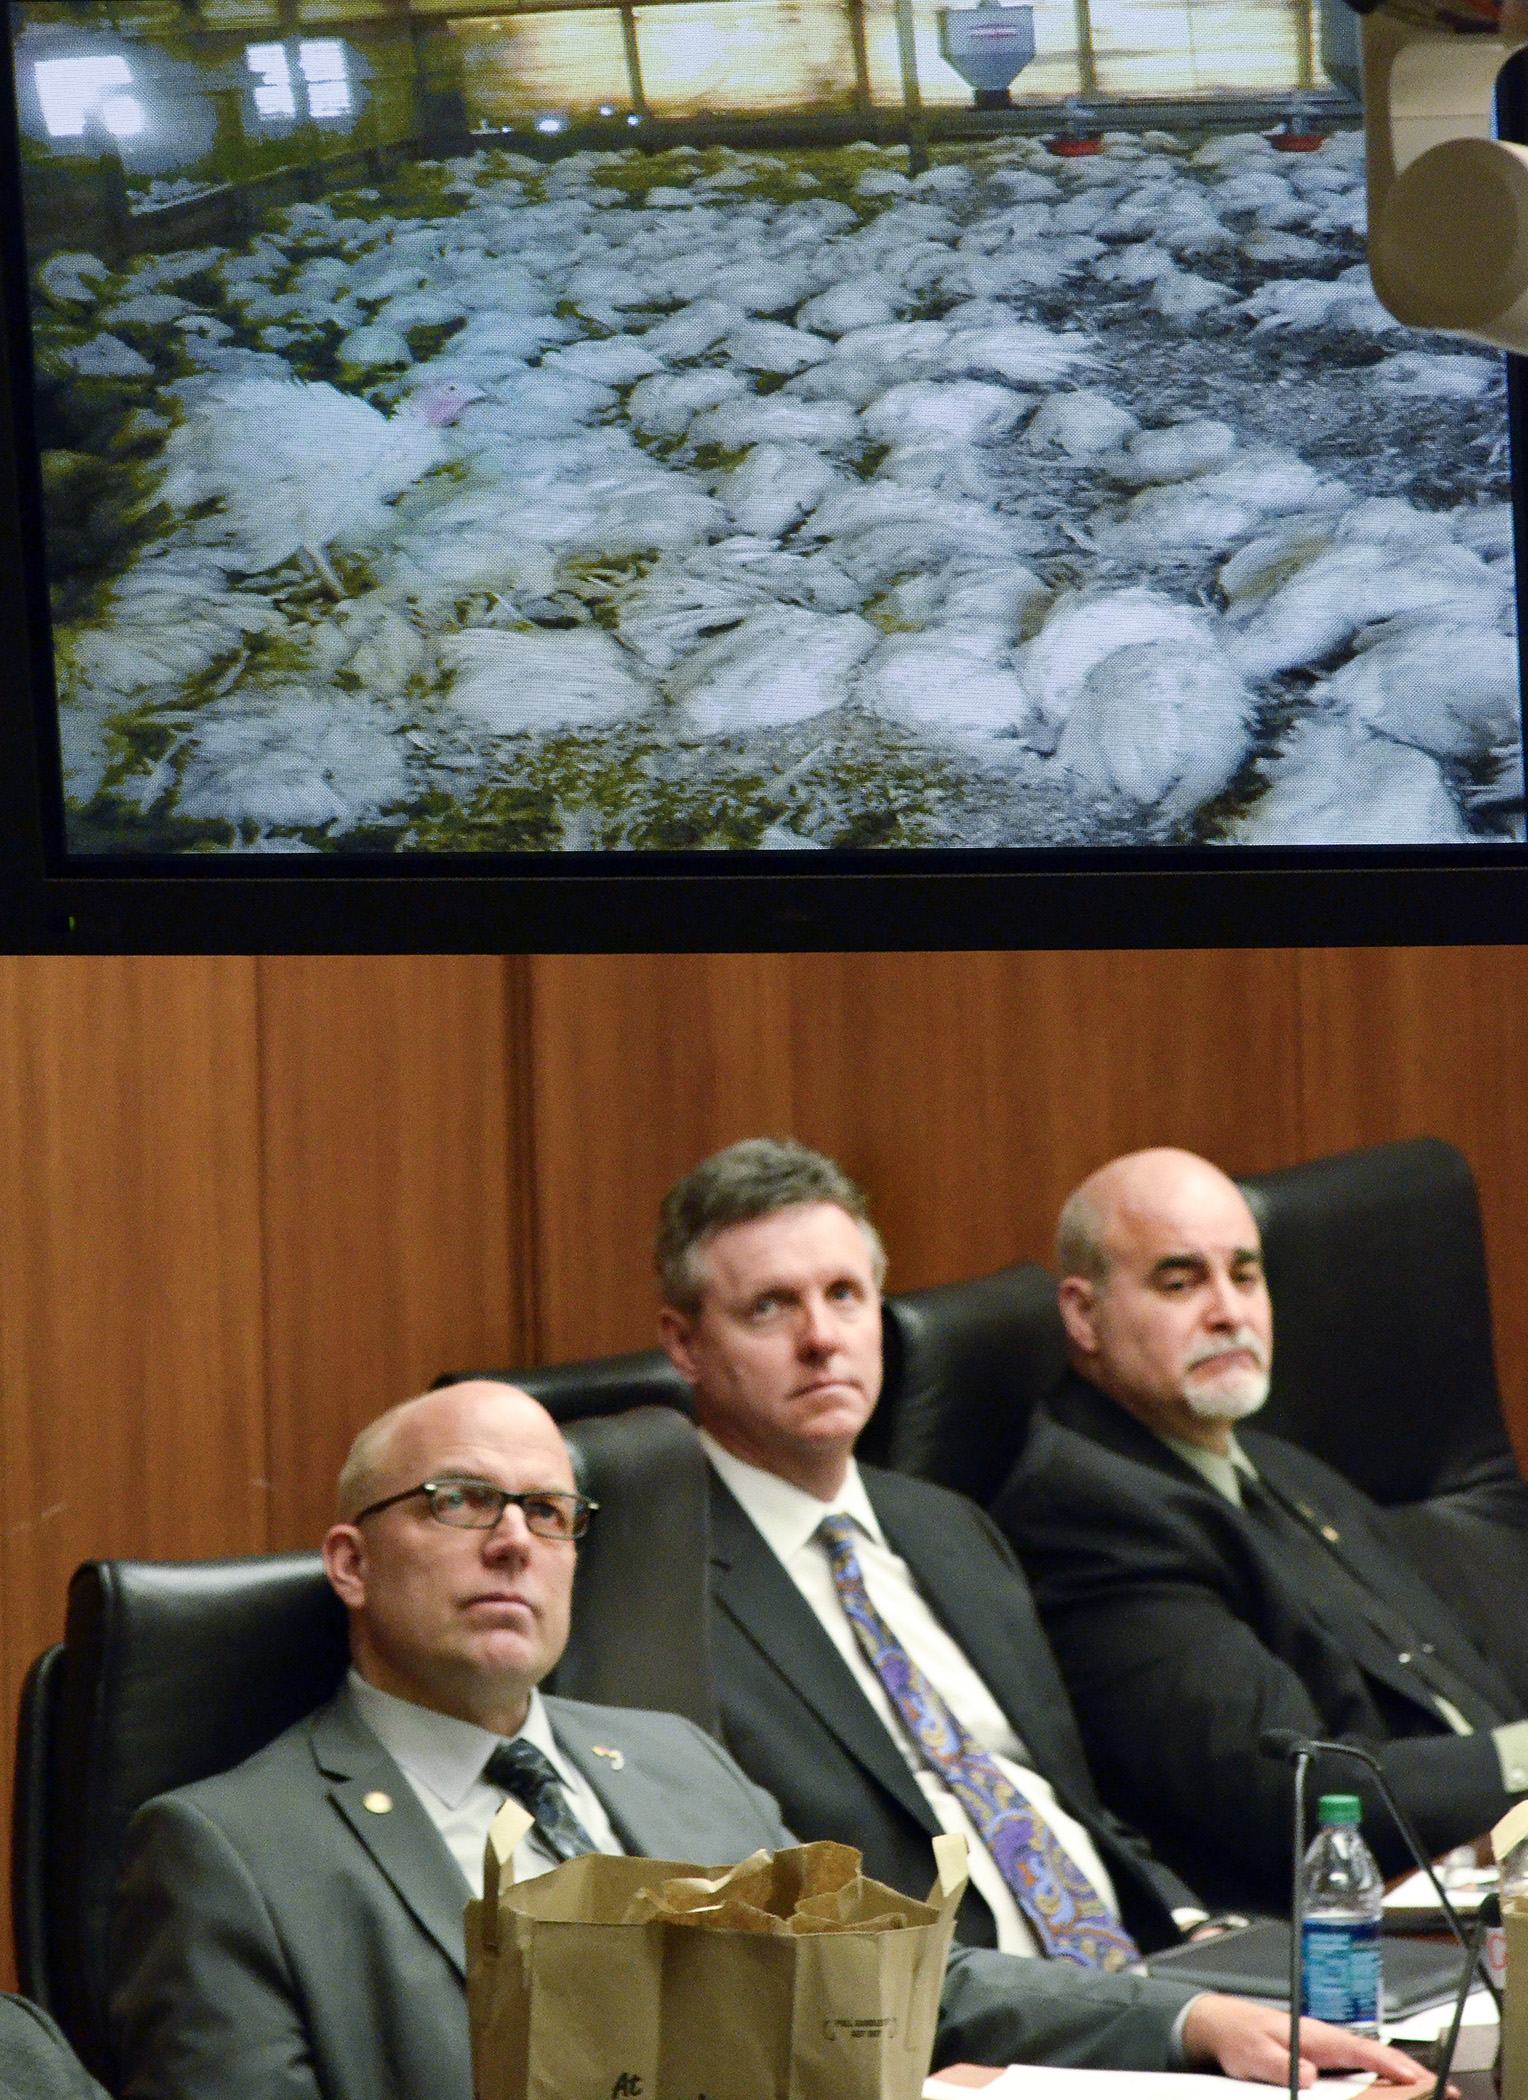 Members of the House agriculture policy and finance committees watch a sobering presentation updating the avian influenza threat at an April 16 joint hearing. Photo by Andrew VonBank